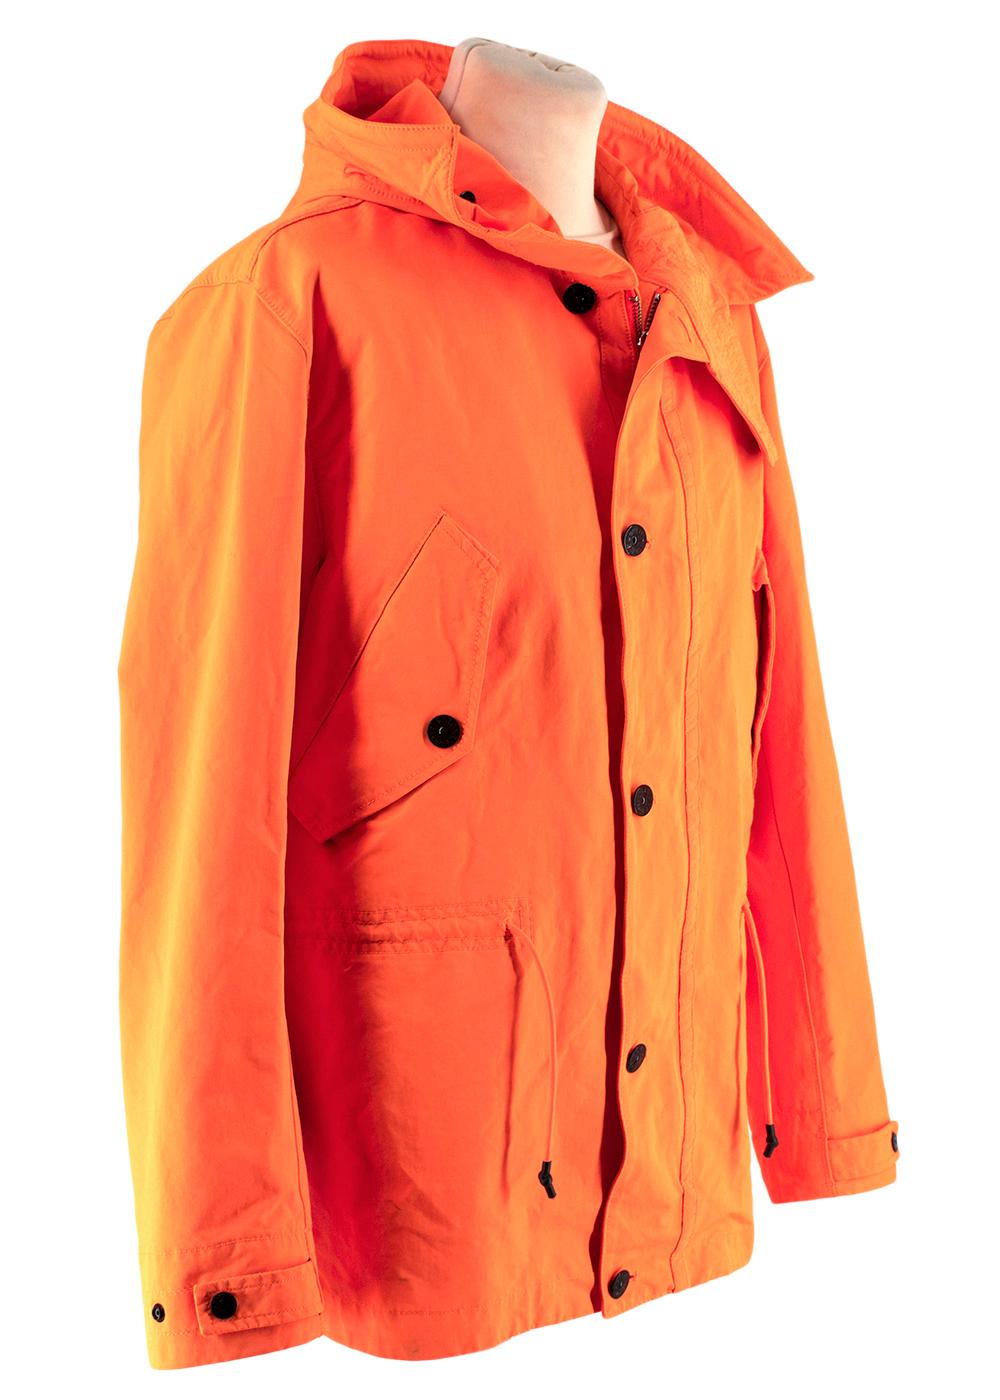 Stone Island Orange David Fluo Jacket

Ample hood with drawstring, over stitched visor and wind flap. Diagonal pockets on upper front, with flap and popper. Drawstring at waist. Strap at cuffs, adjust with poppers. Hidden double slider zipper and